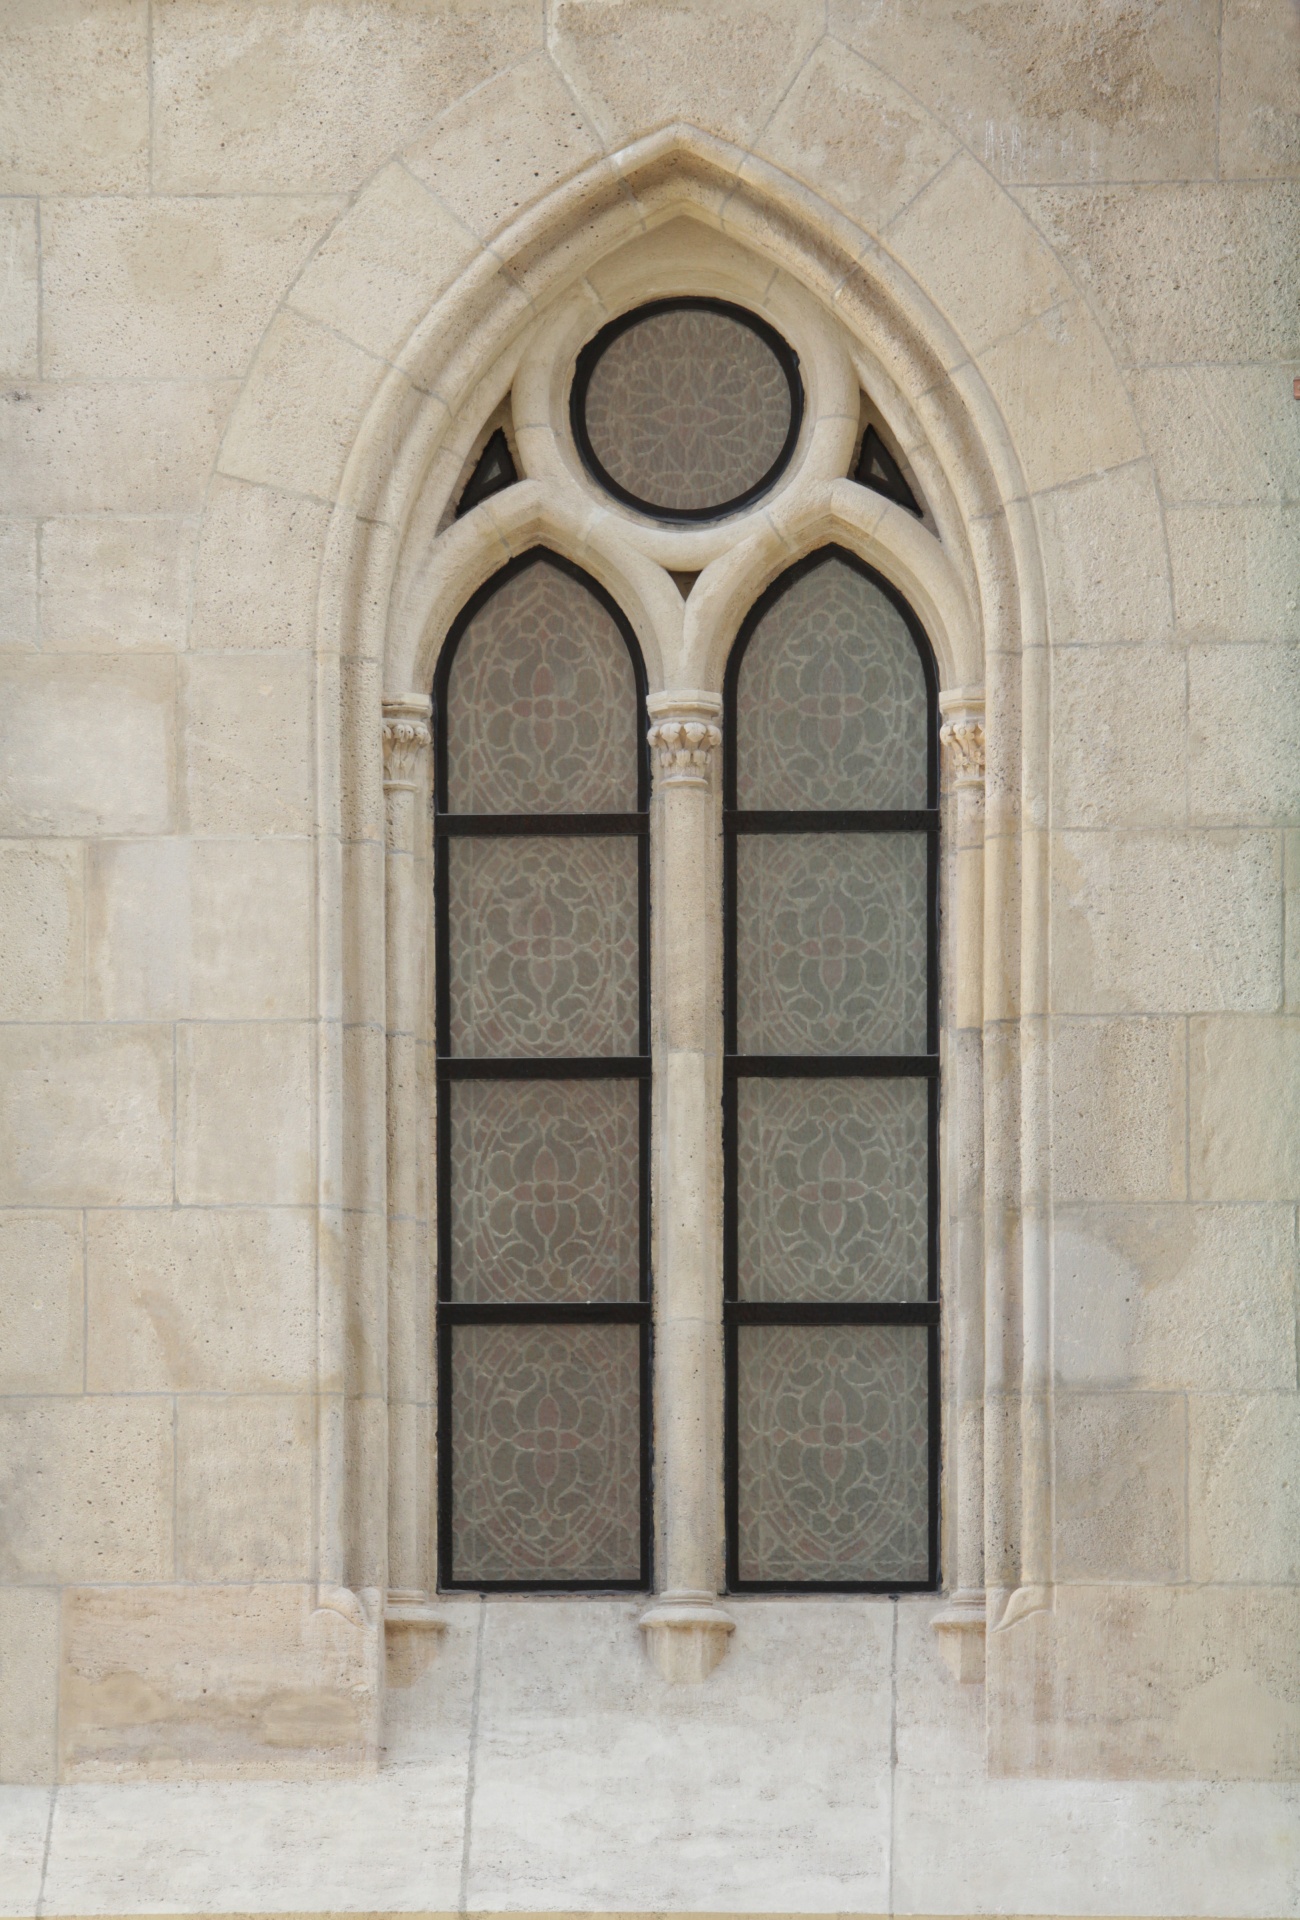 Gothic style church, decorated window.